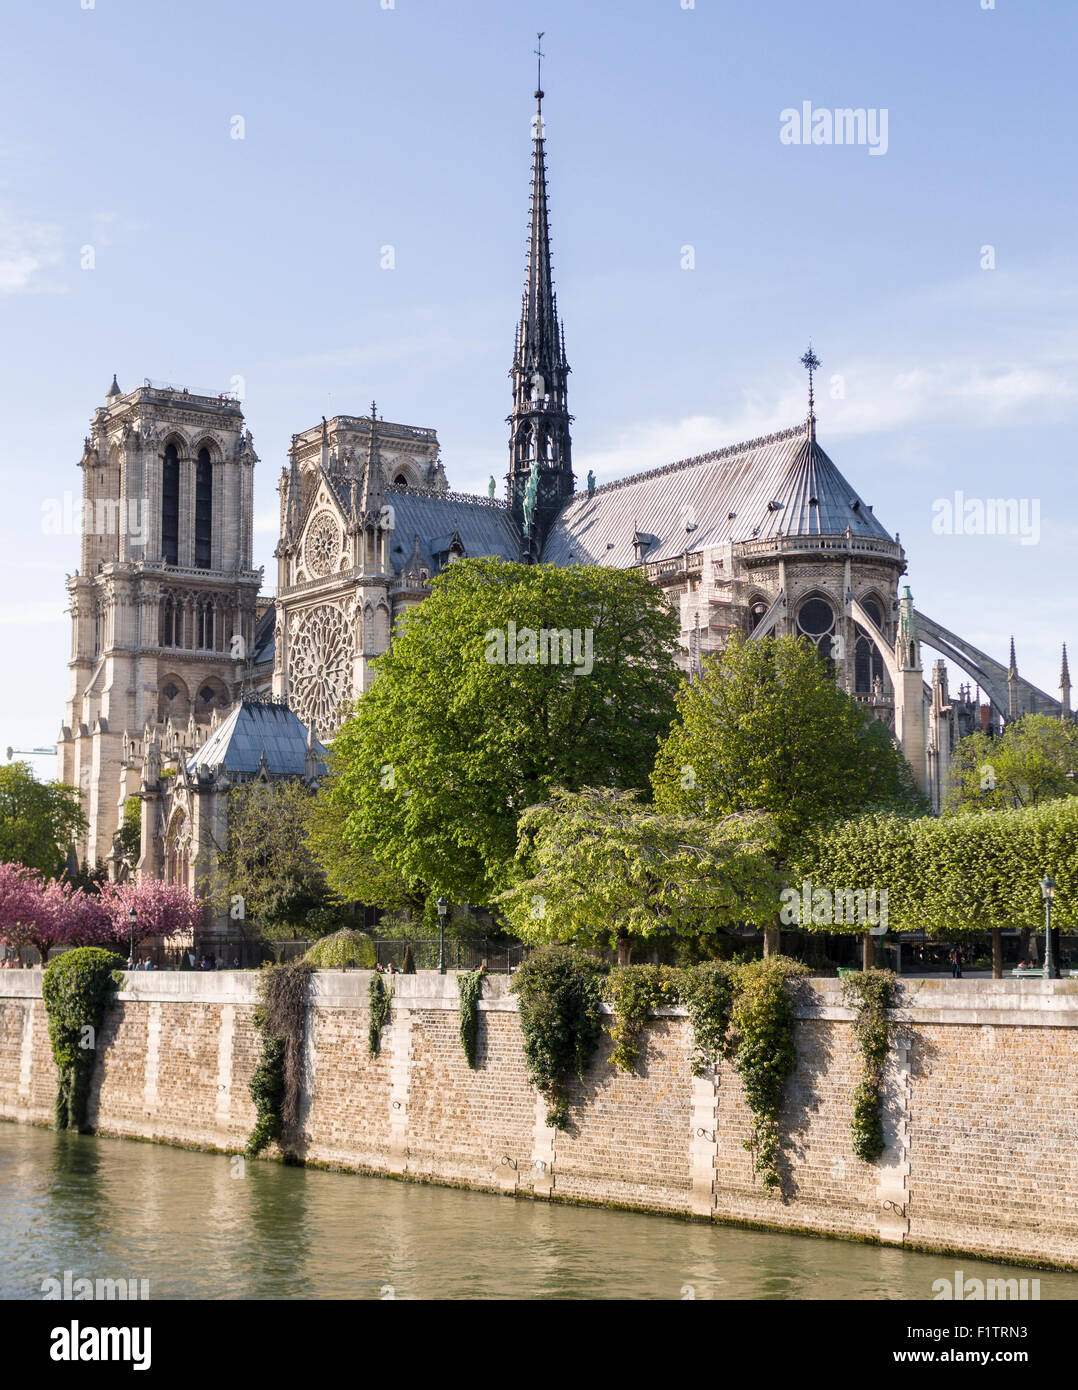 Notre-Dame Cathedral from Across the Seine. The walled river forms a base for this view of the famous cathedral's west facade. Stock Photo